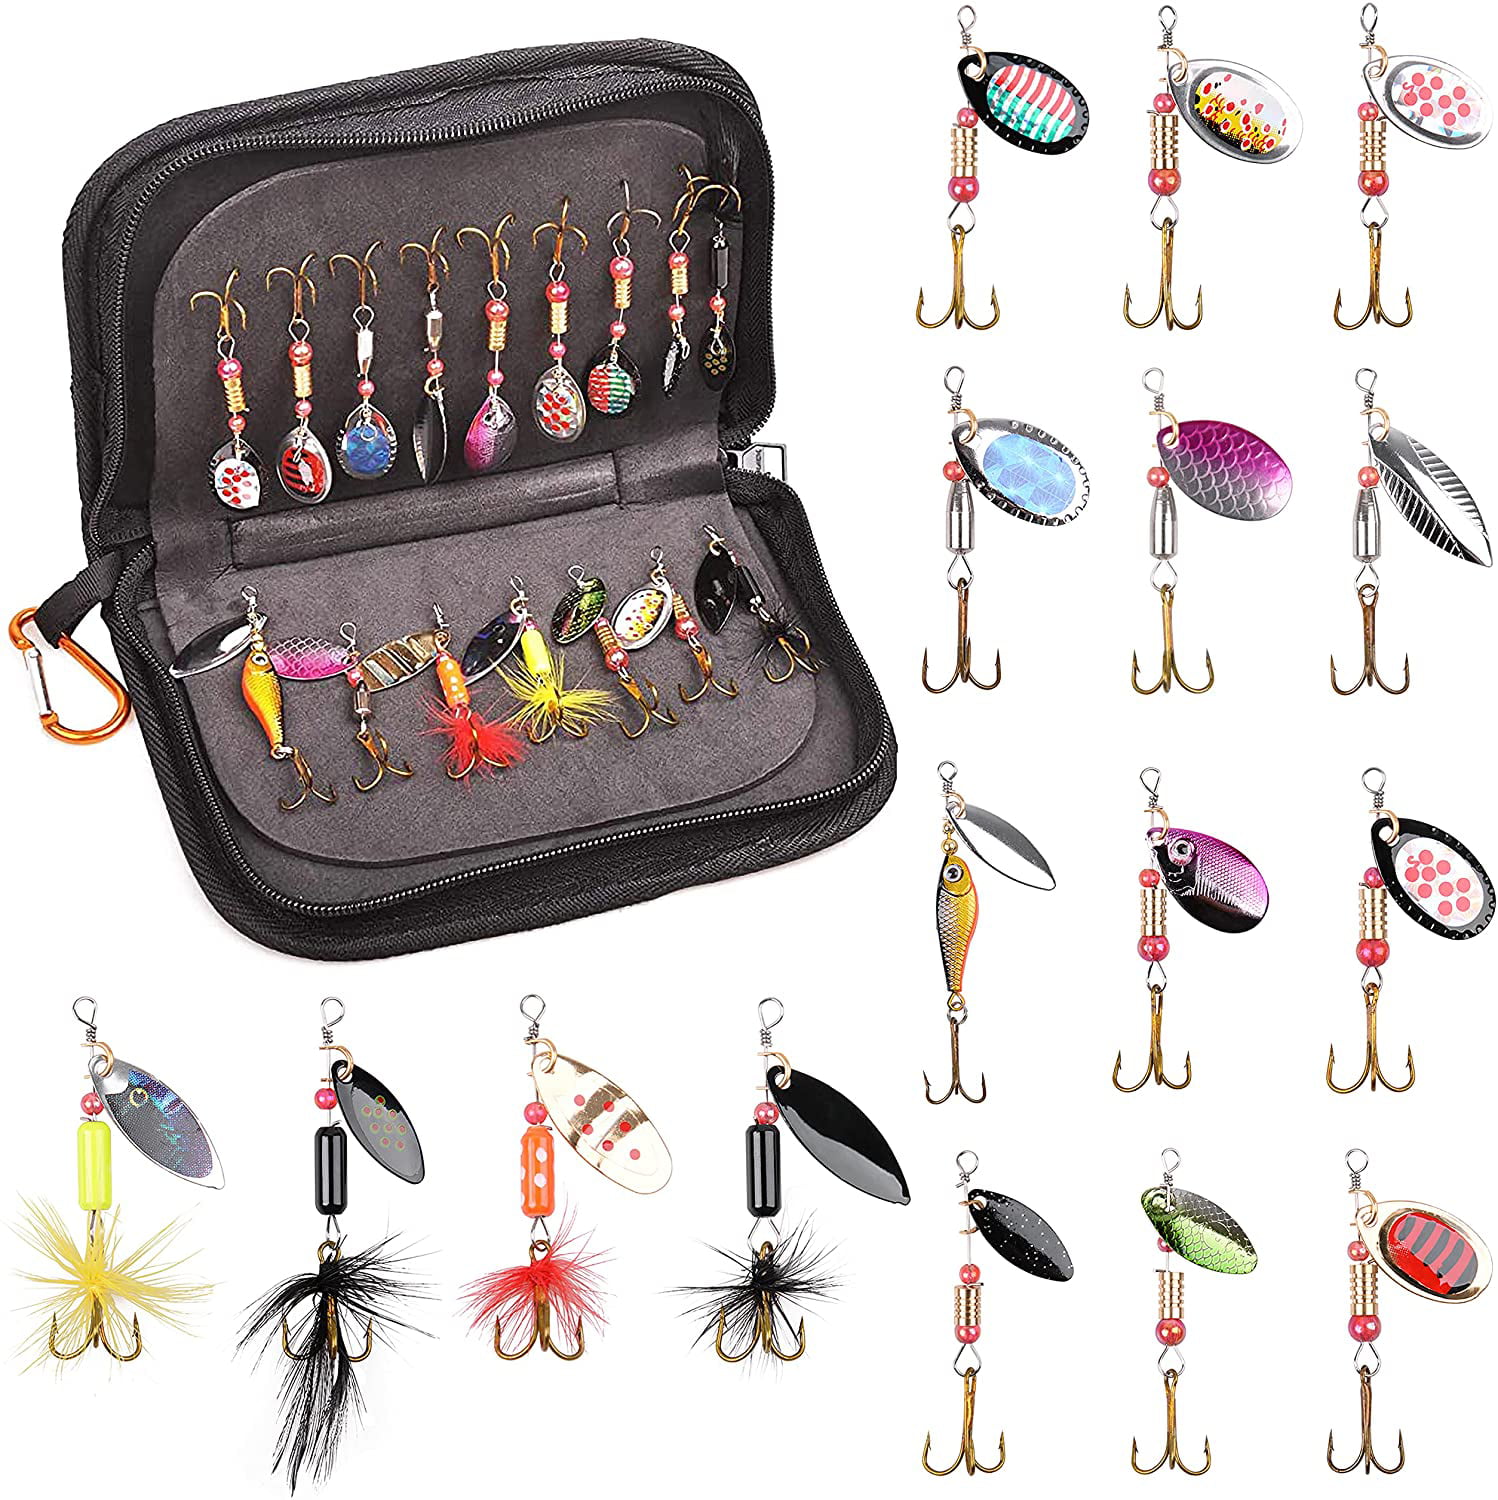 Fishing Lure Kit for Trout 16pcs Spinner Baits Feather Tail Spinner Bait  Bass Lures Hard Metal Lure kit with Portable Carry Bag 